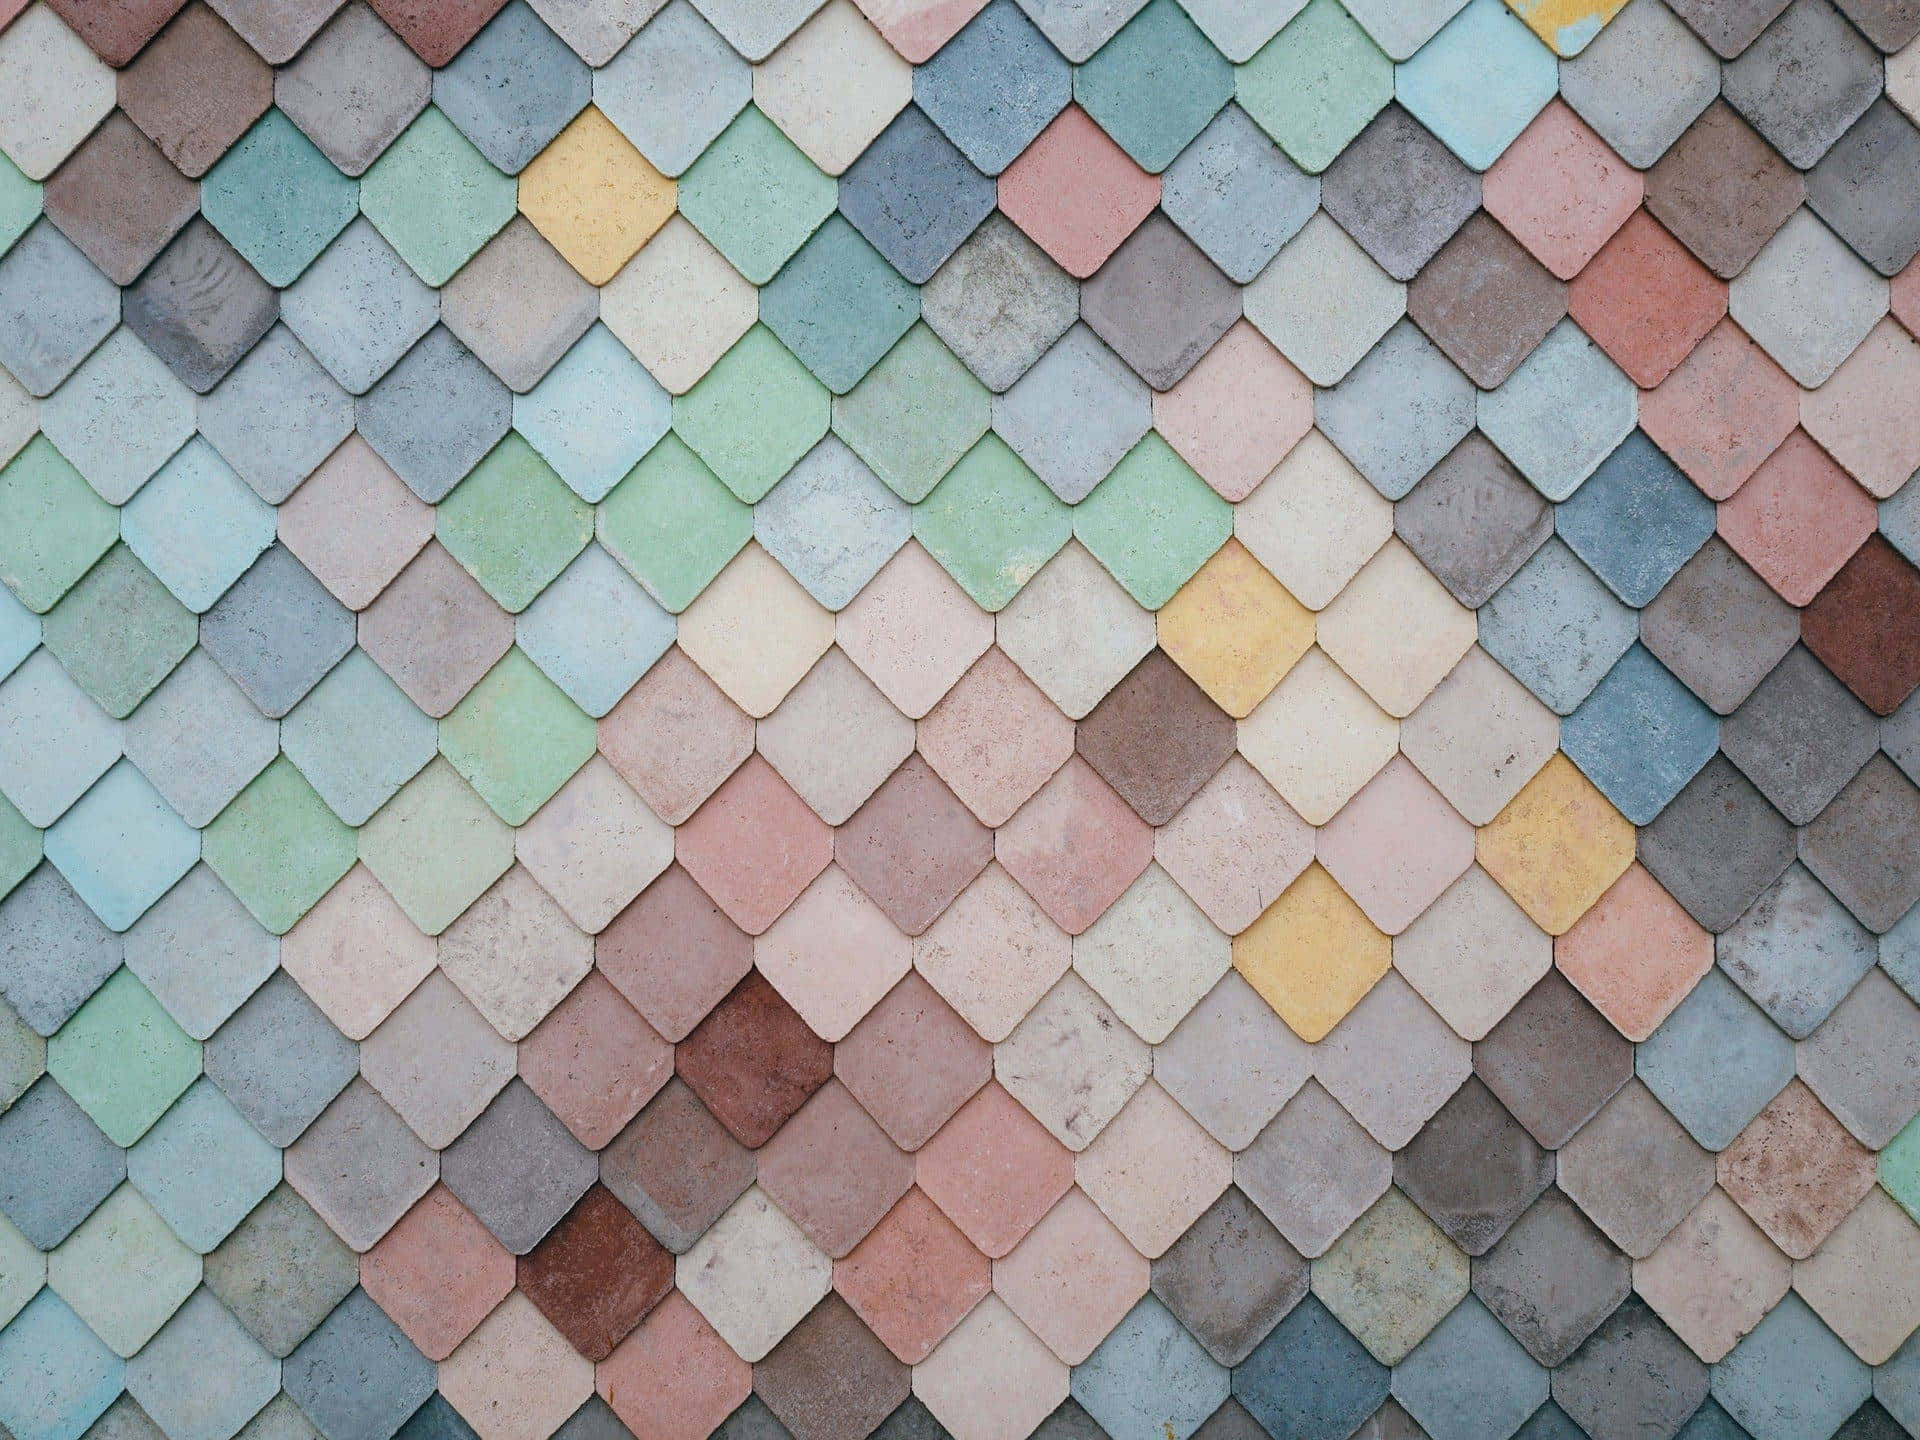 A Colorful Tiled Roof With A Pattern Of Different Colors